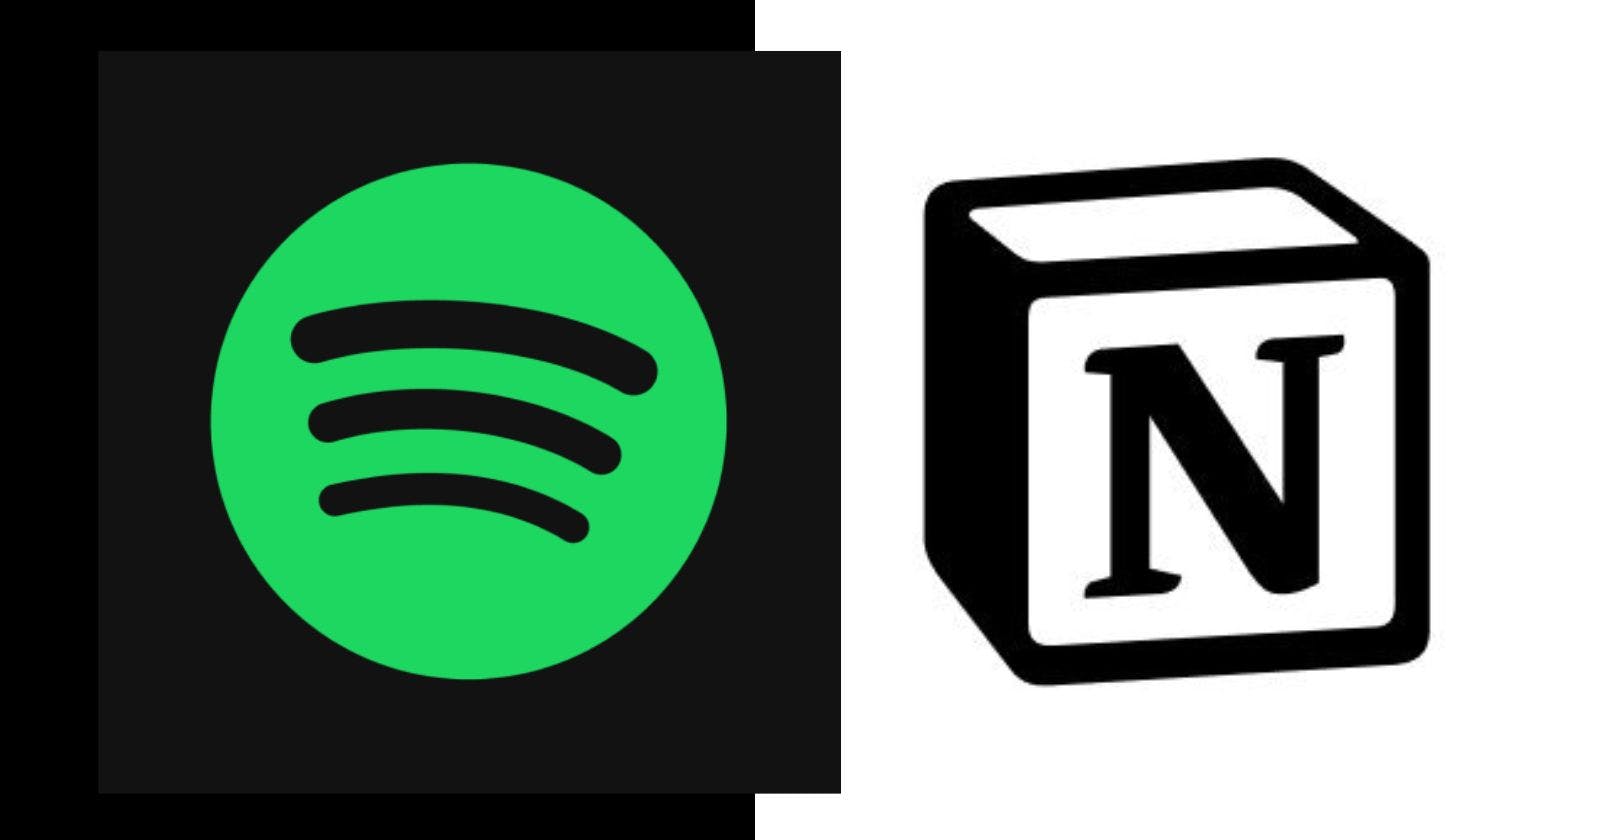 How to Add a Spotify Playlist to Notion in 4 Simple Steps